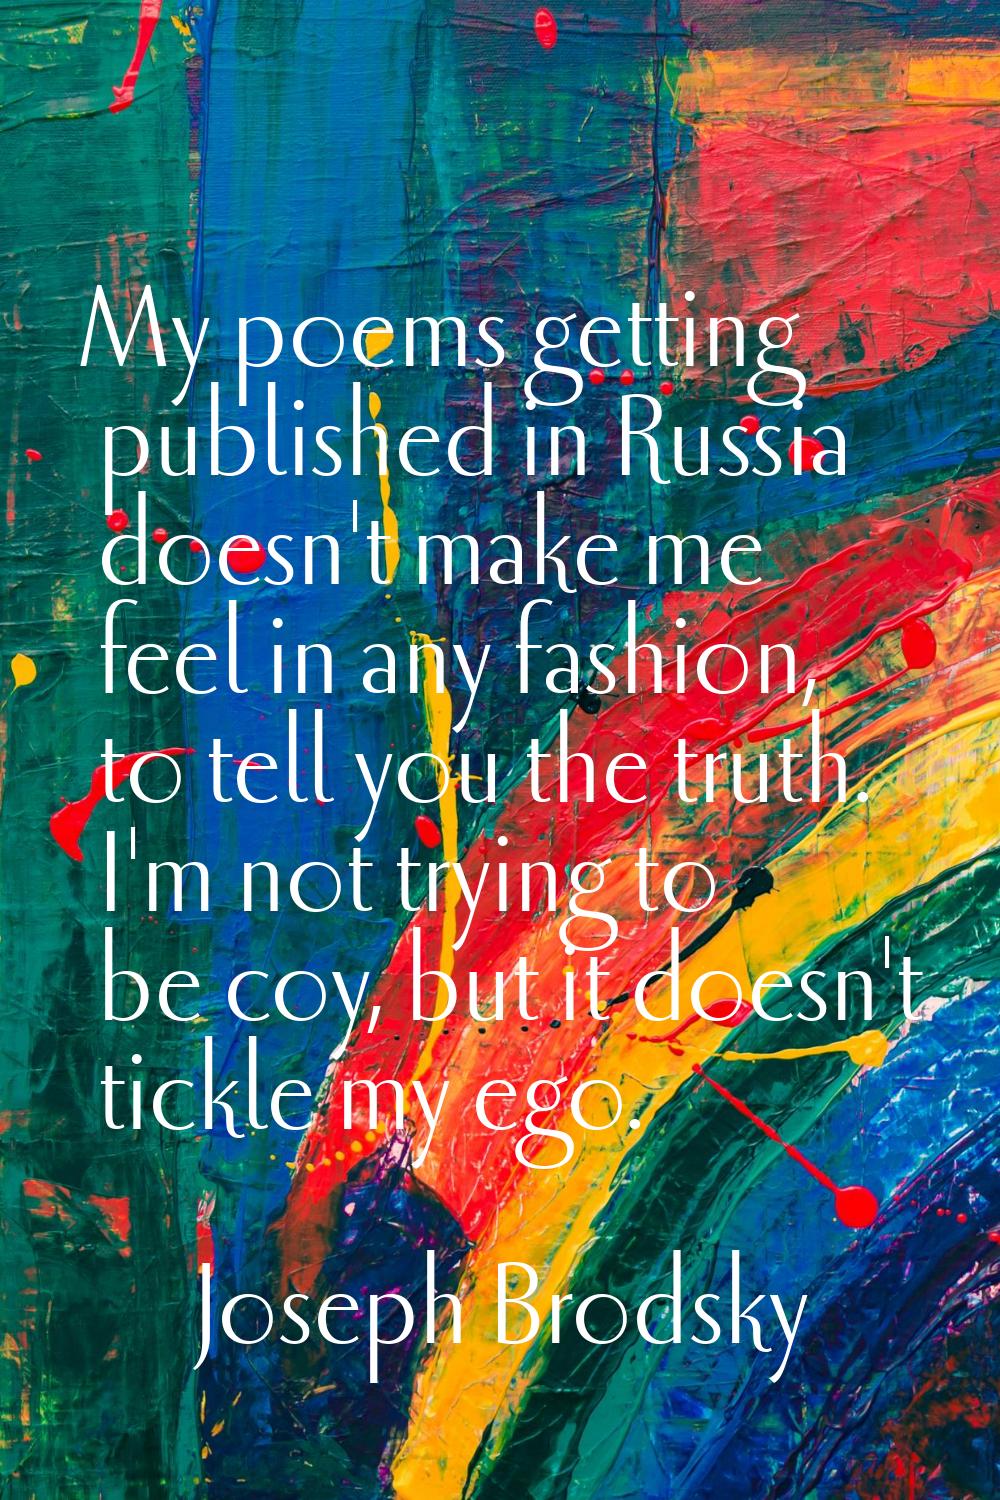 My poems getting published in Russia doesn't make me feel in any fashion, to tell you the truth. I'